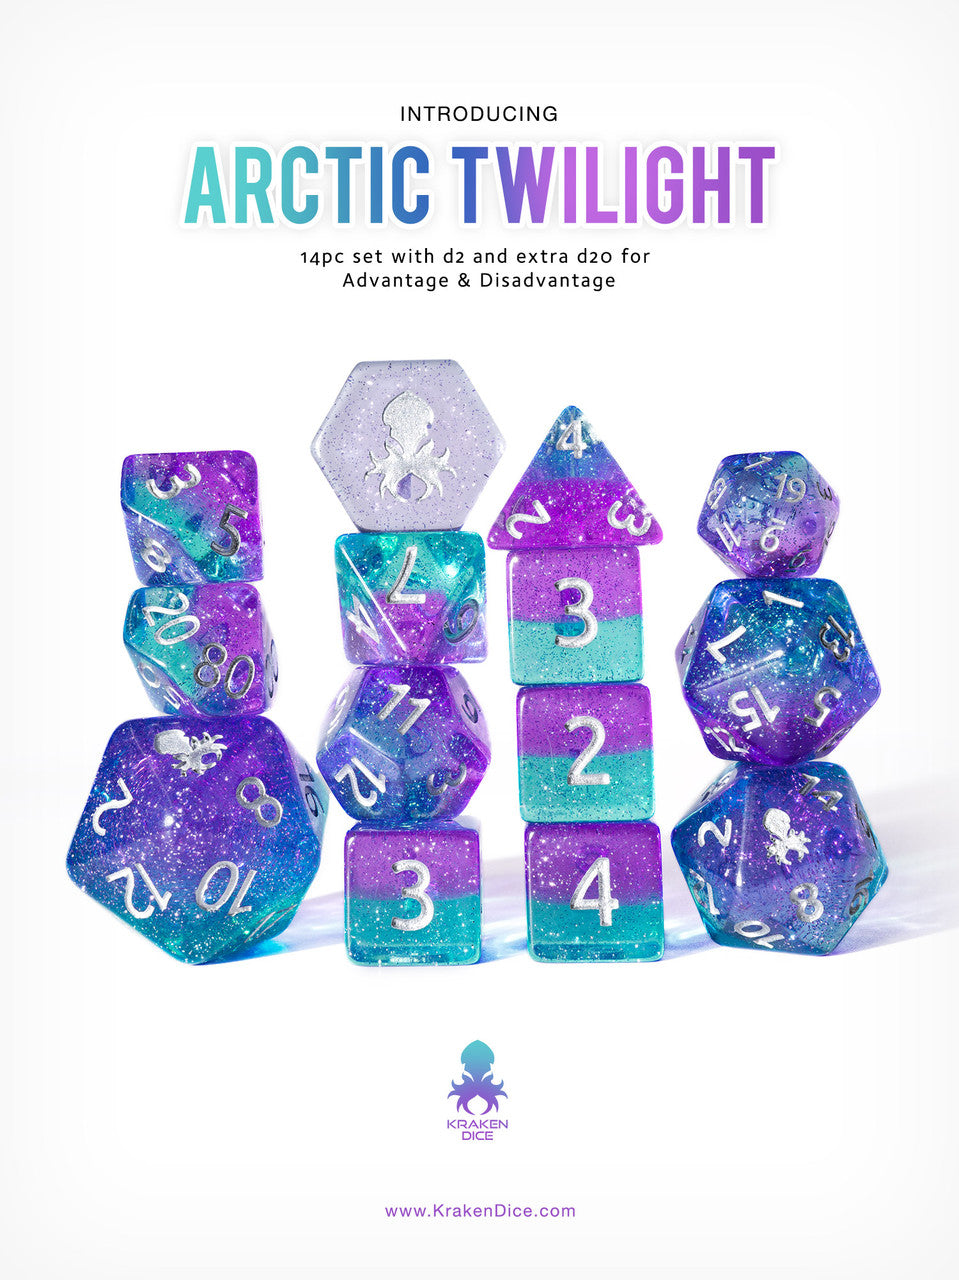 Arctic Twilight 14pc DnD Dice Set inked in silver